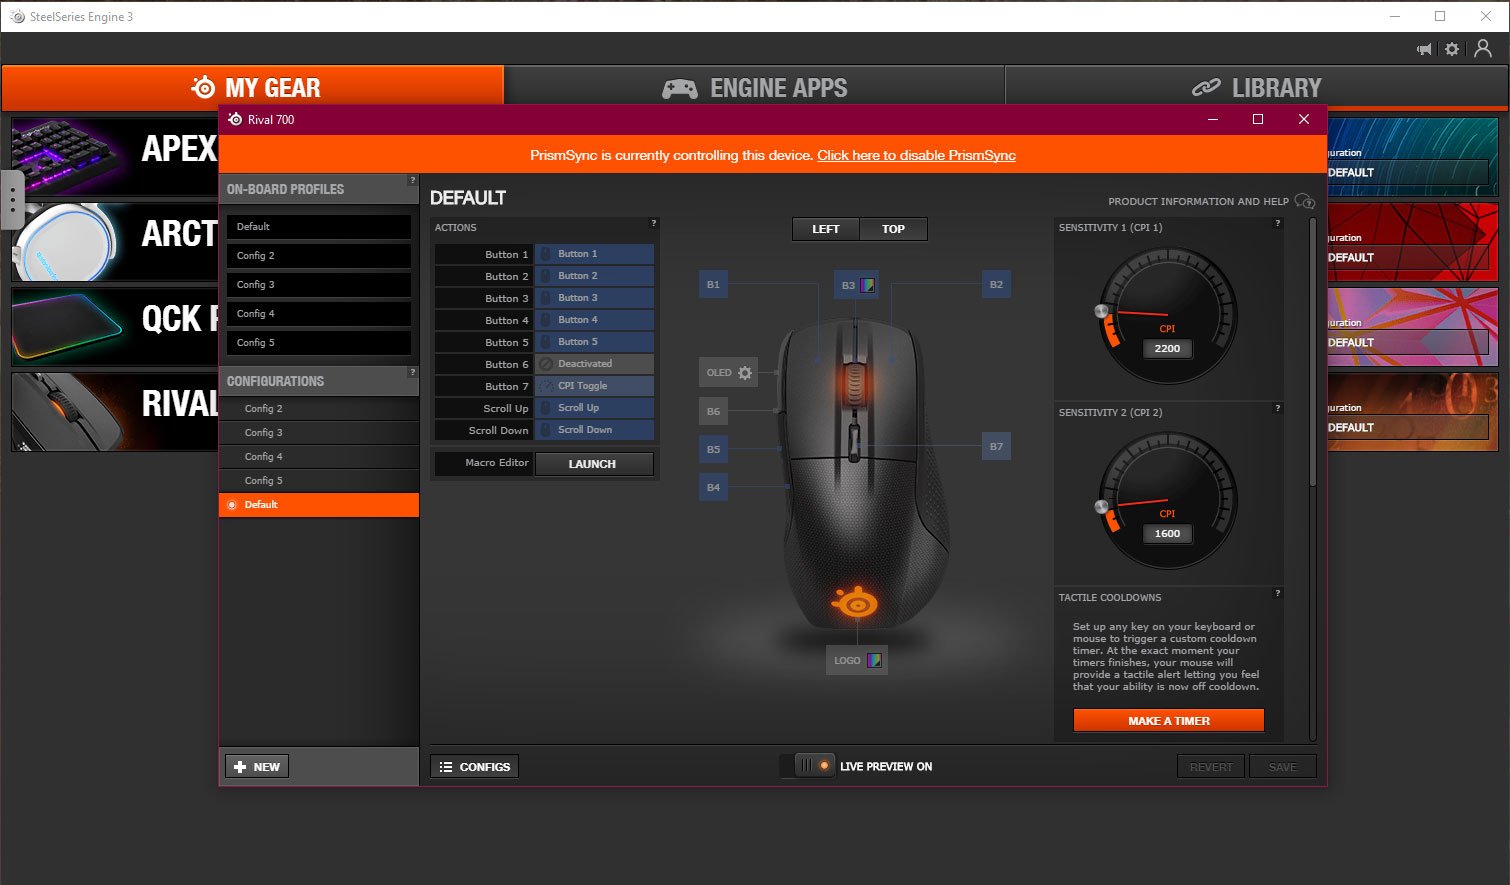 how to download steelseries software